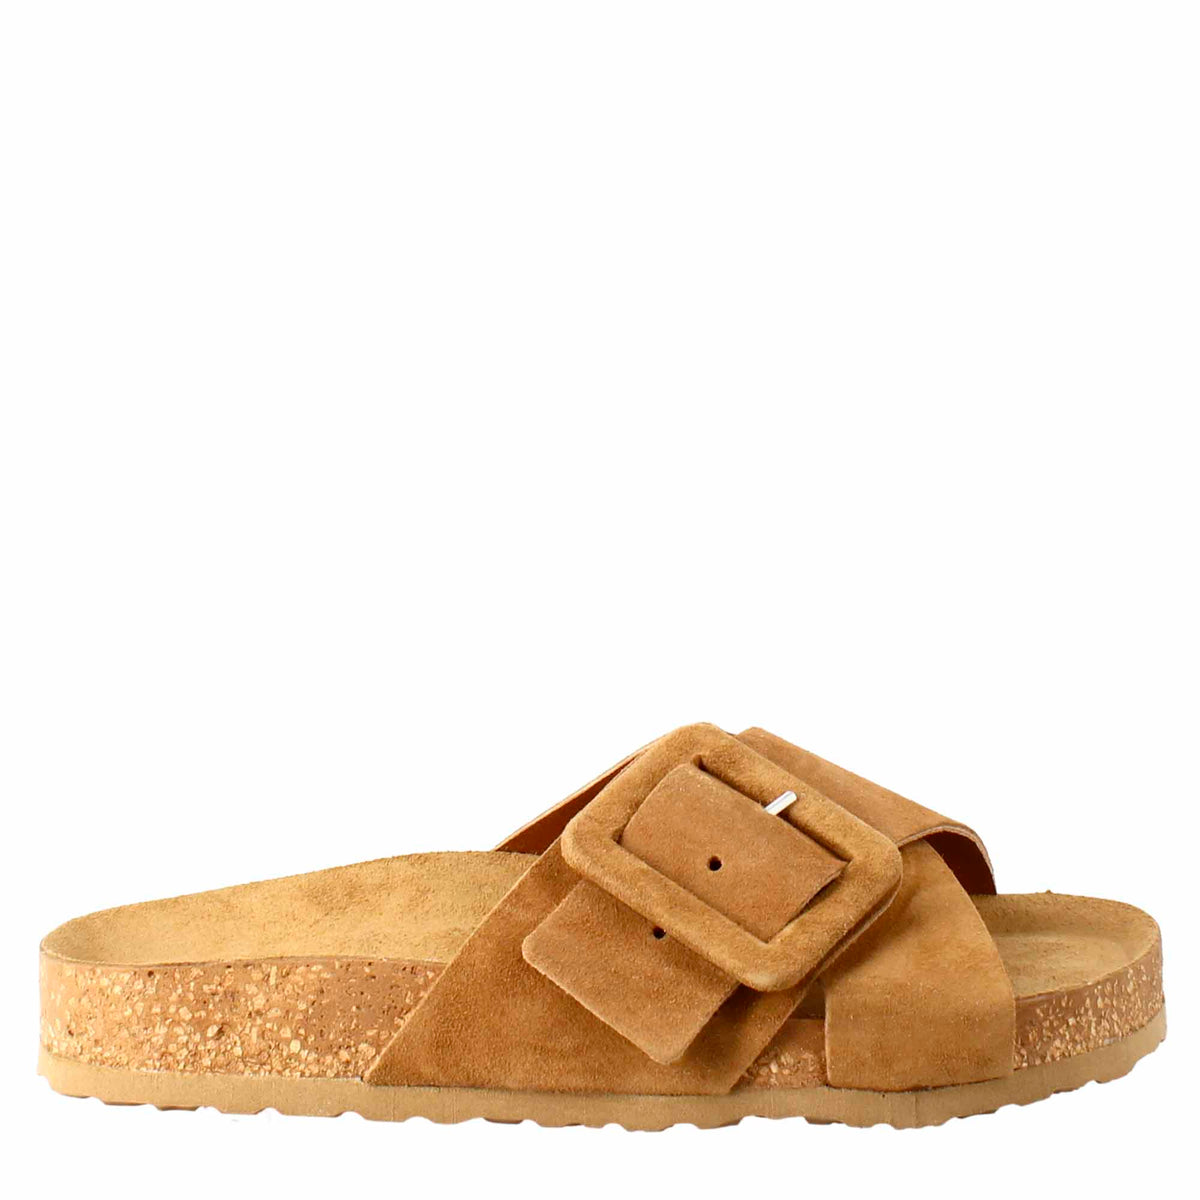 Woman's double band sandal and buckle in brown suede